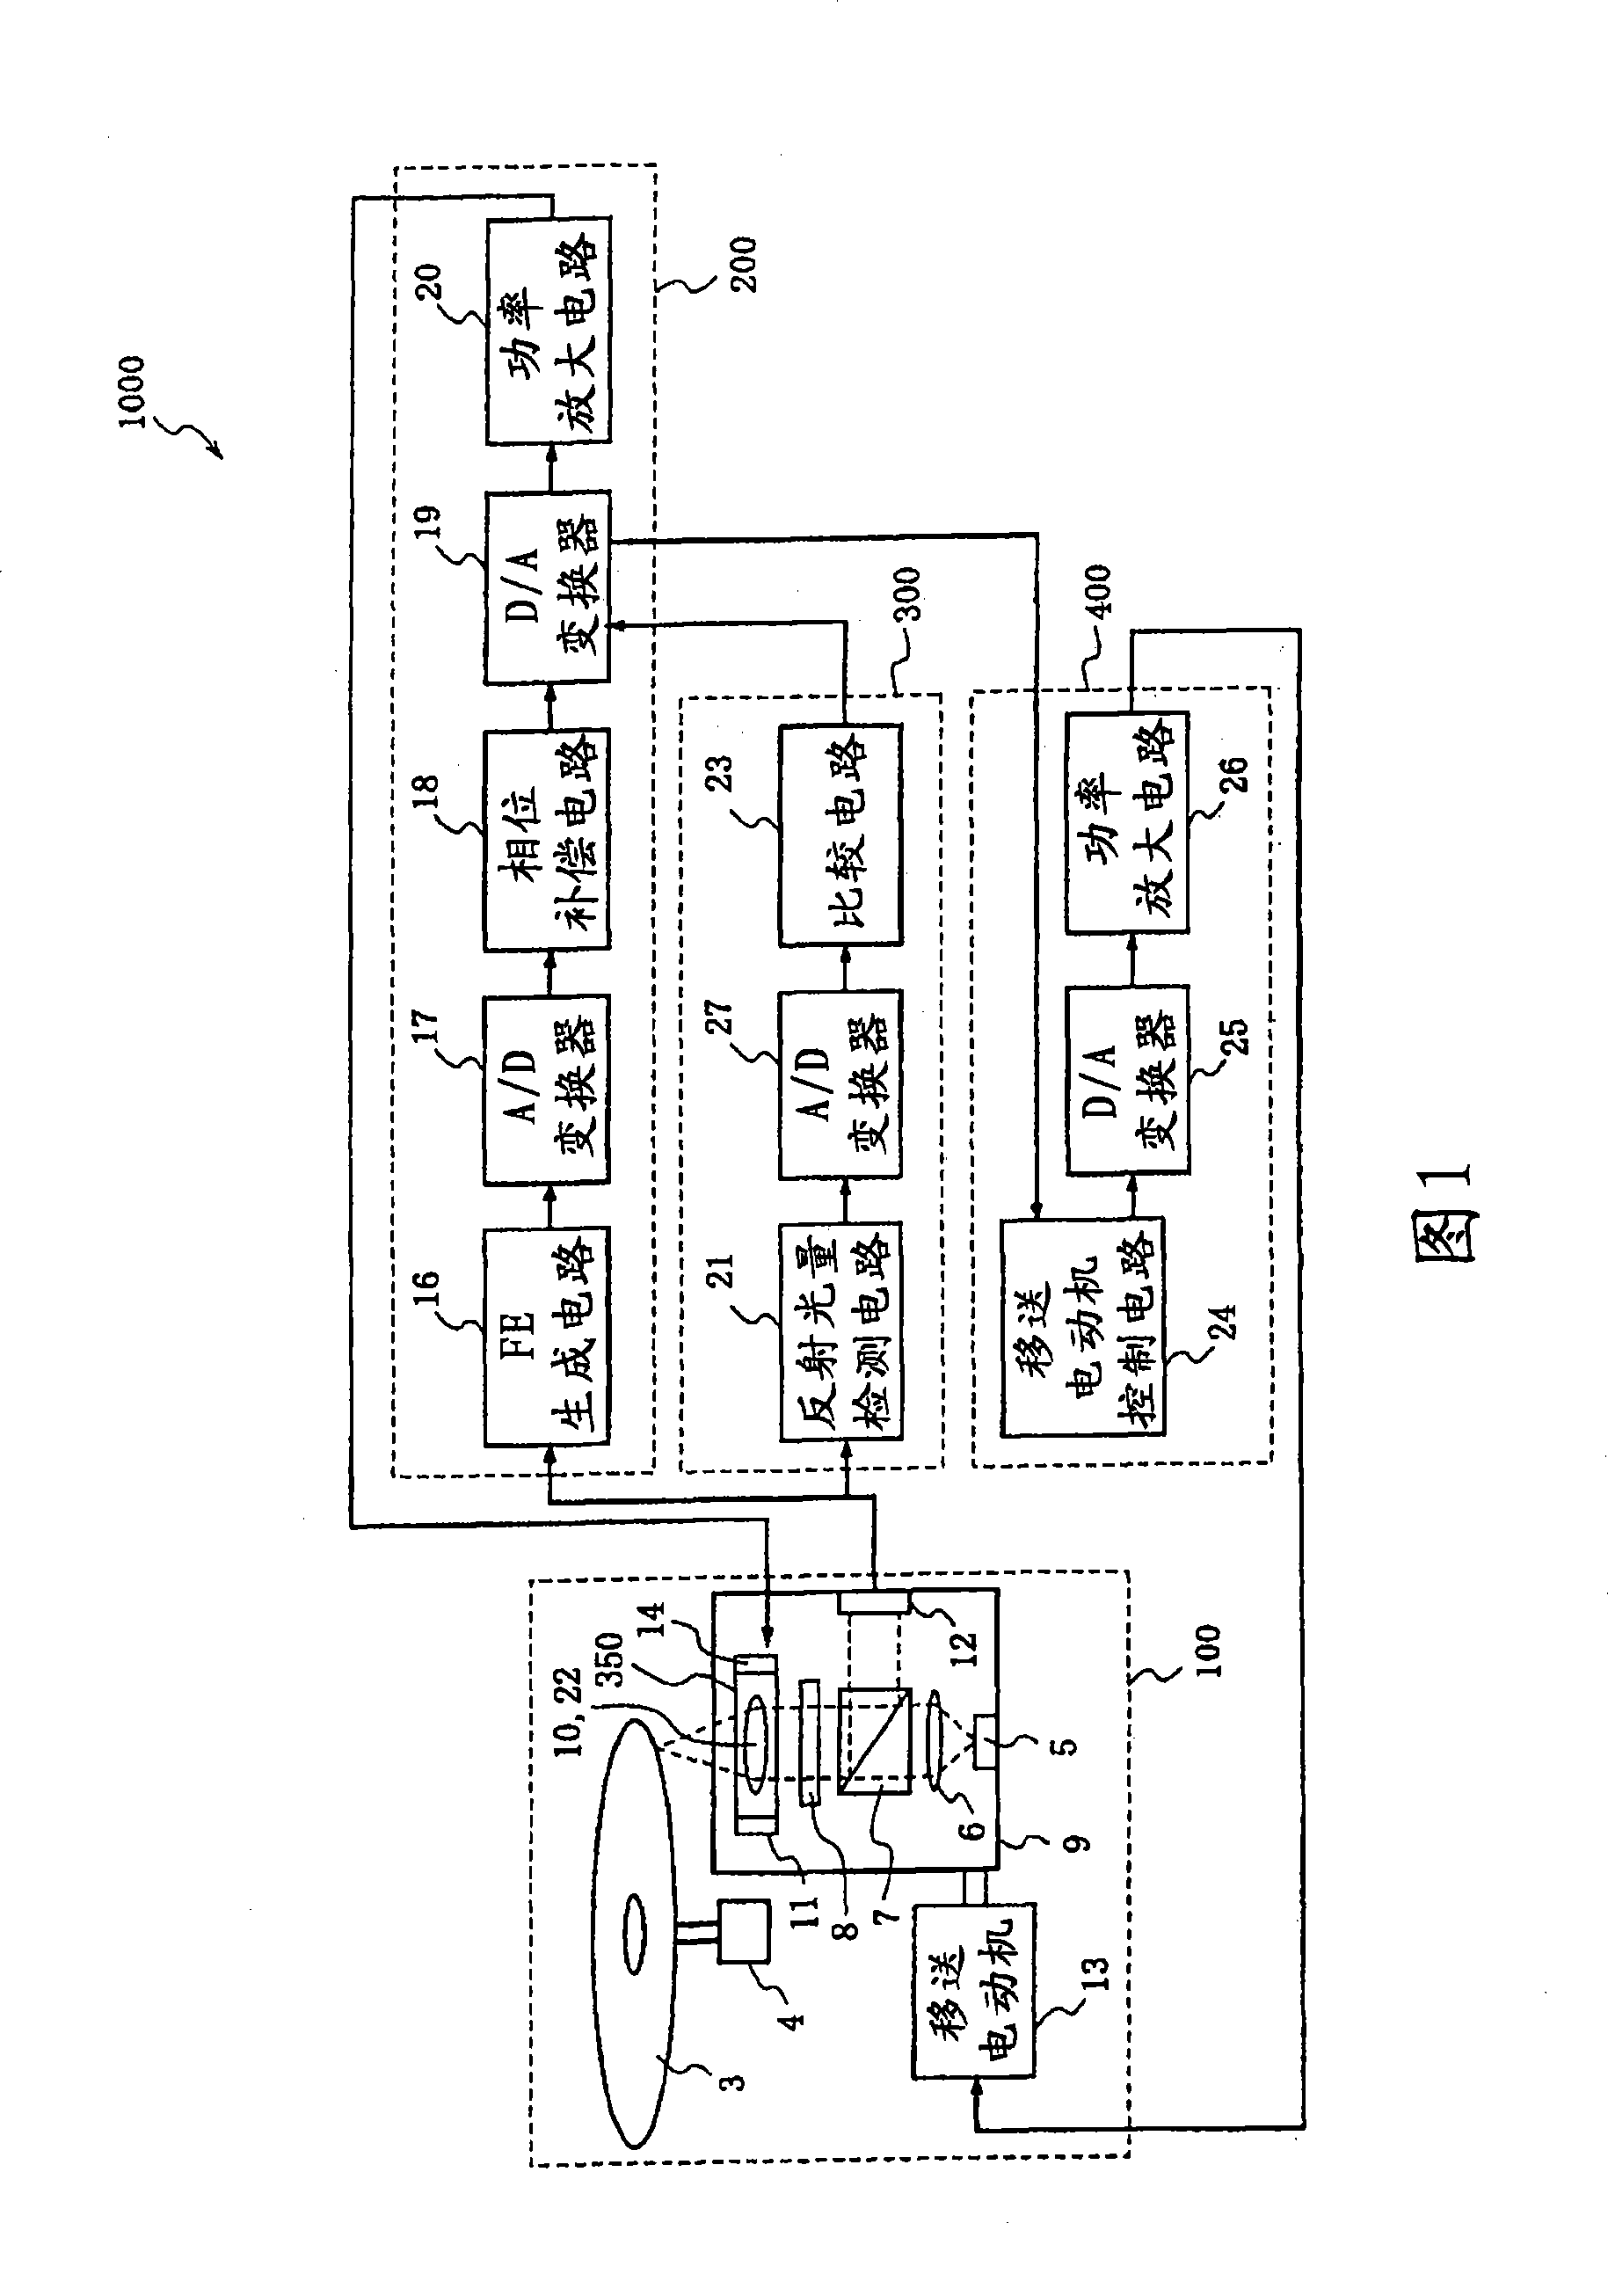 Optical head carrying device, integrated circuit for optical head carrying device, focusing lens driving device and integrated circuit for focusing lens driving device